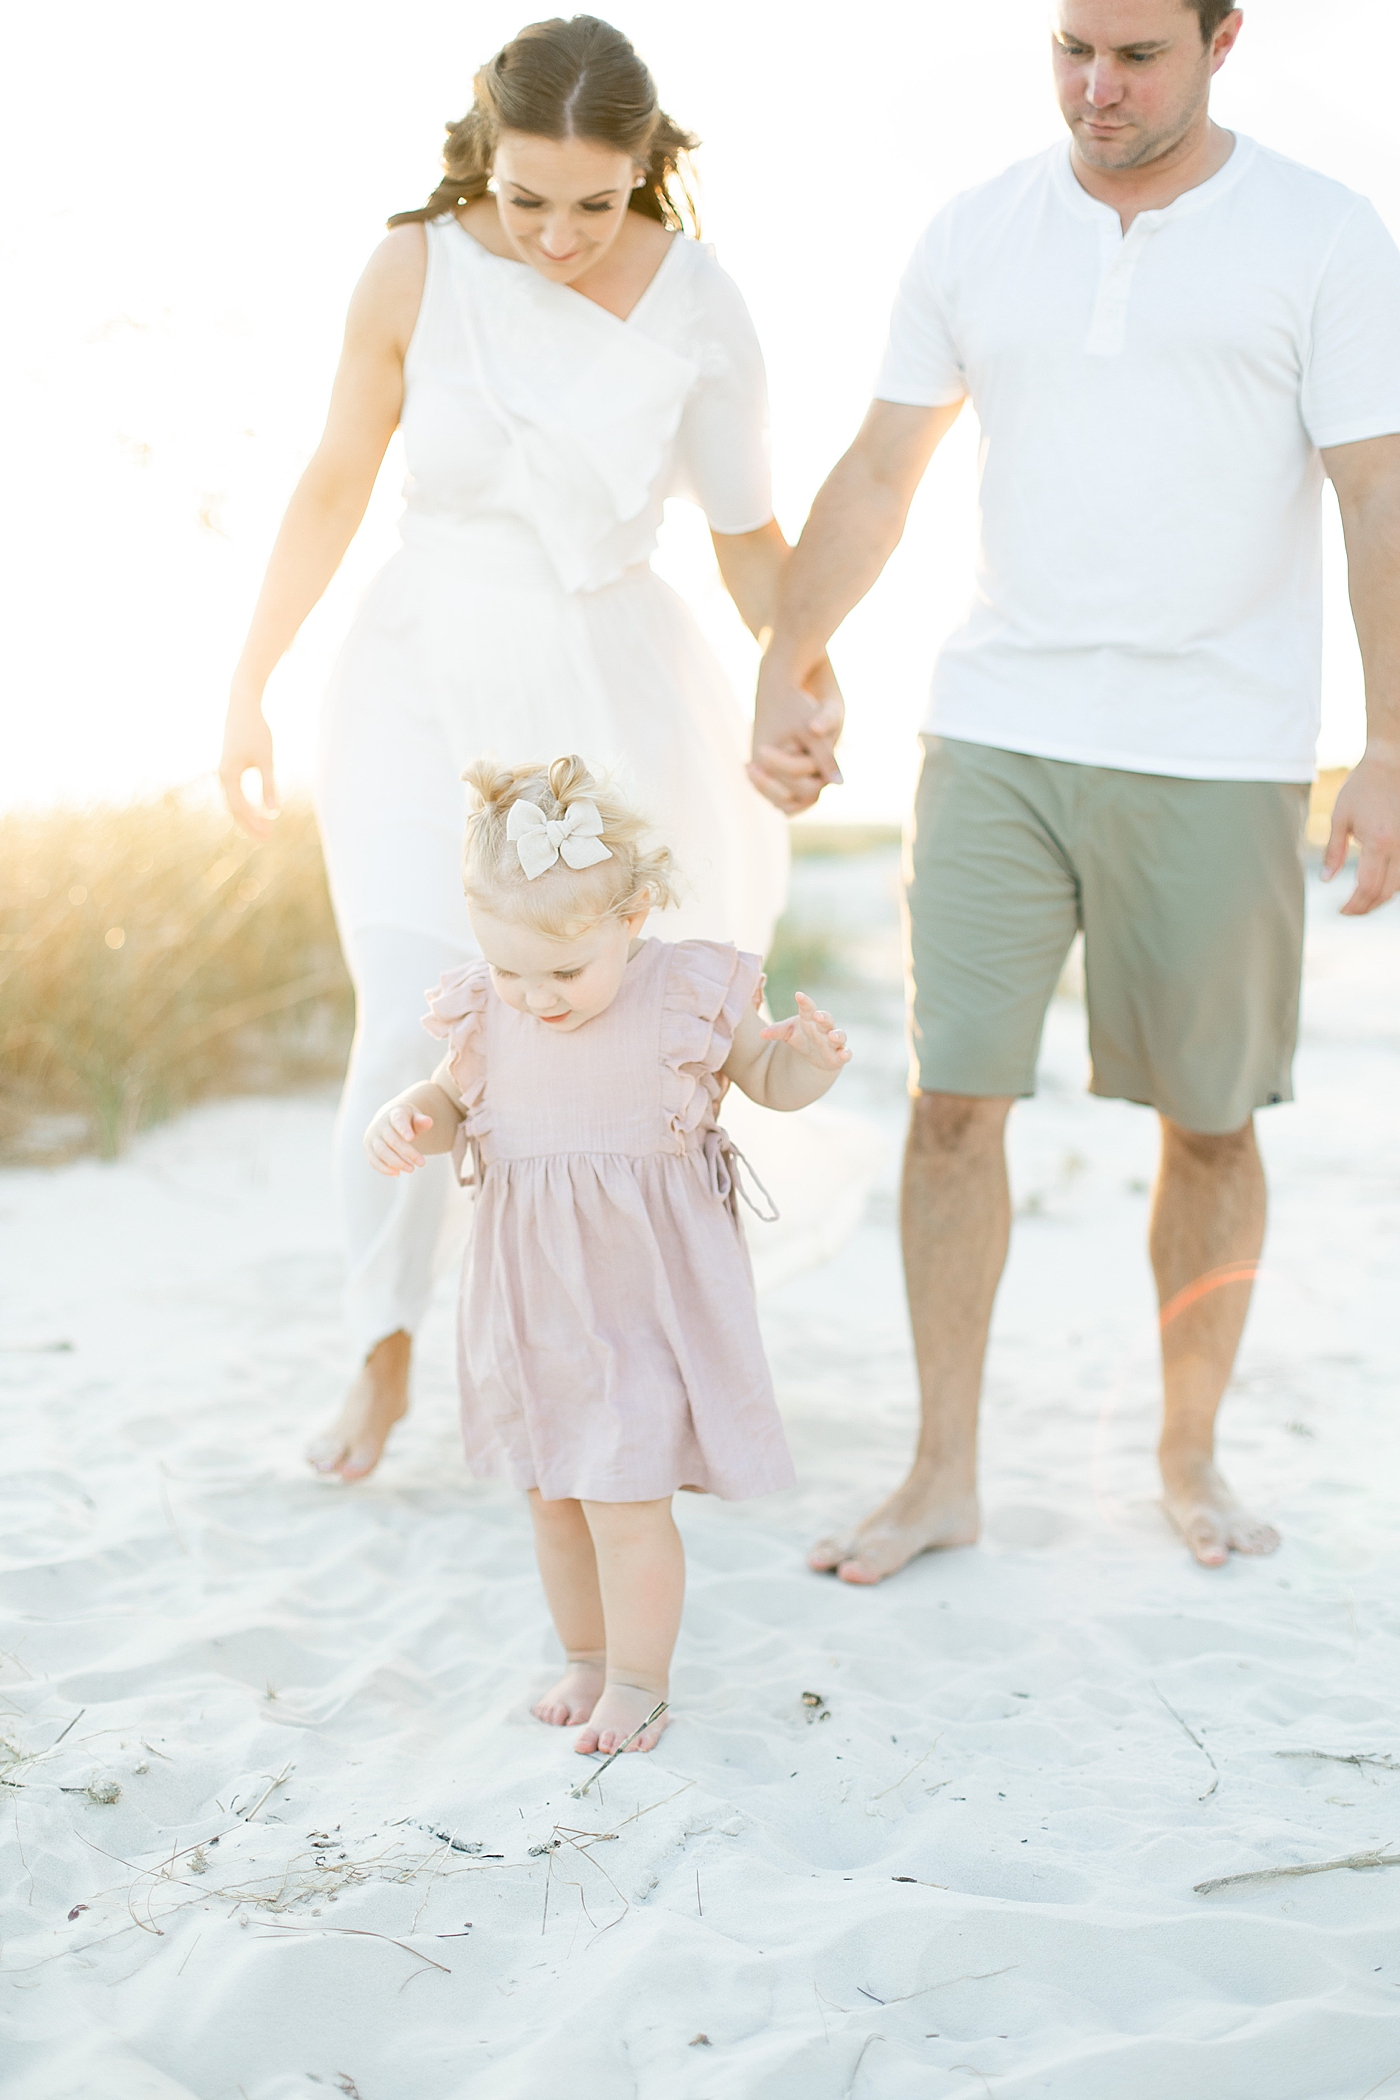 Mom and dad walking behind toddler baby girl on the beach | Photo by Little Sunshine Photography